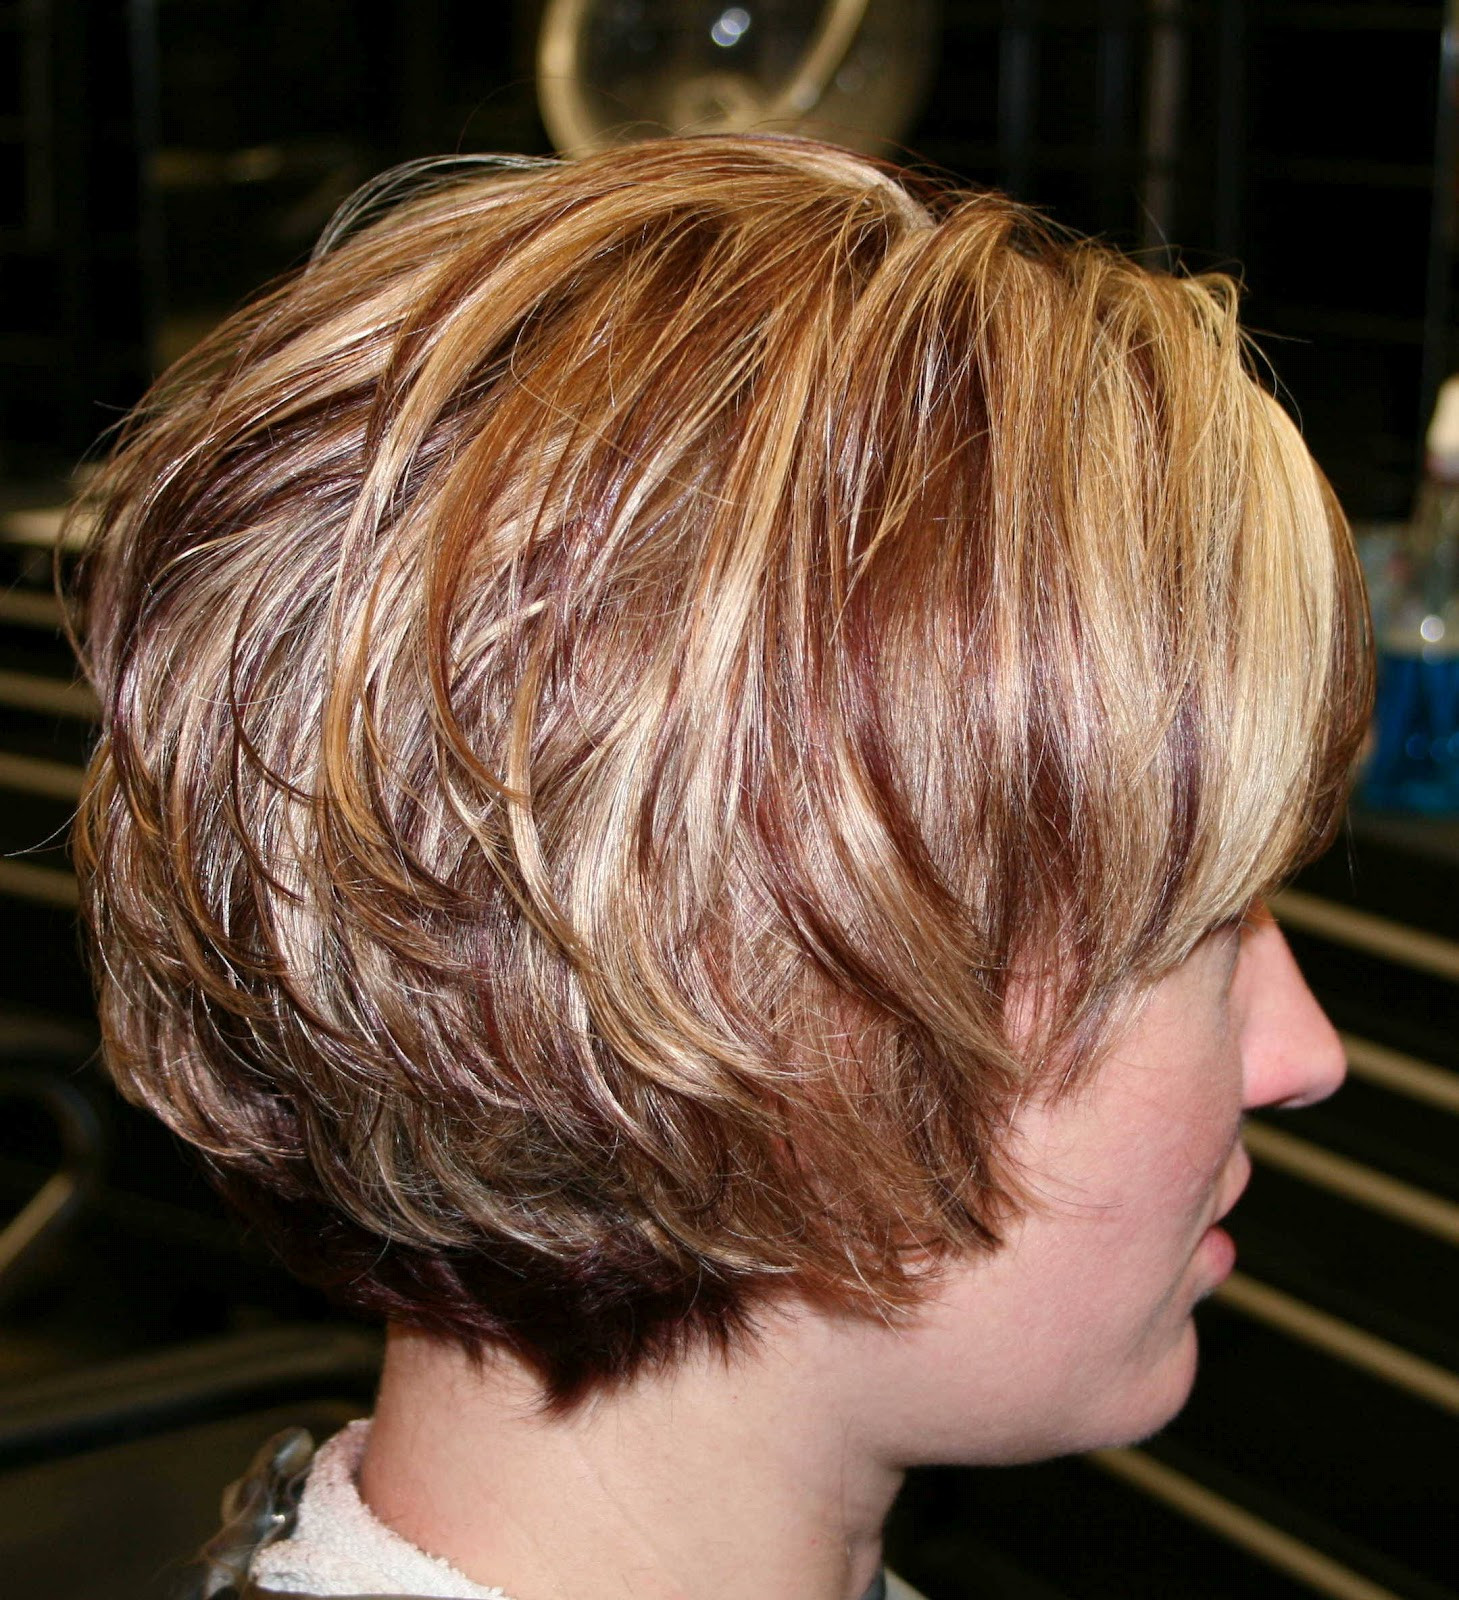 Short Angled Bob Hairstyles
 Latest Hair Styles Short Haircuts for 2012 Angled and